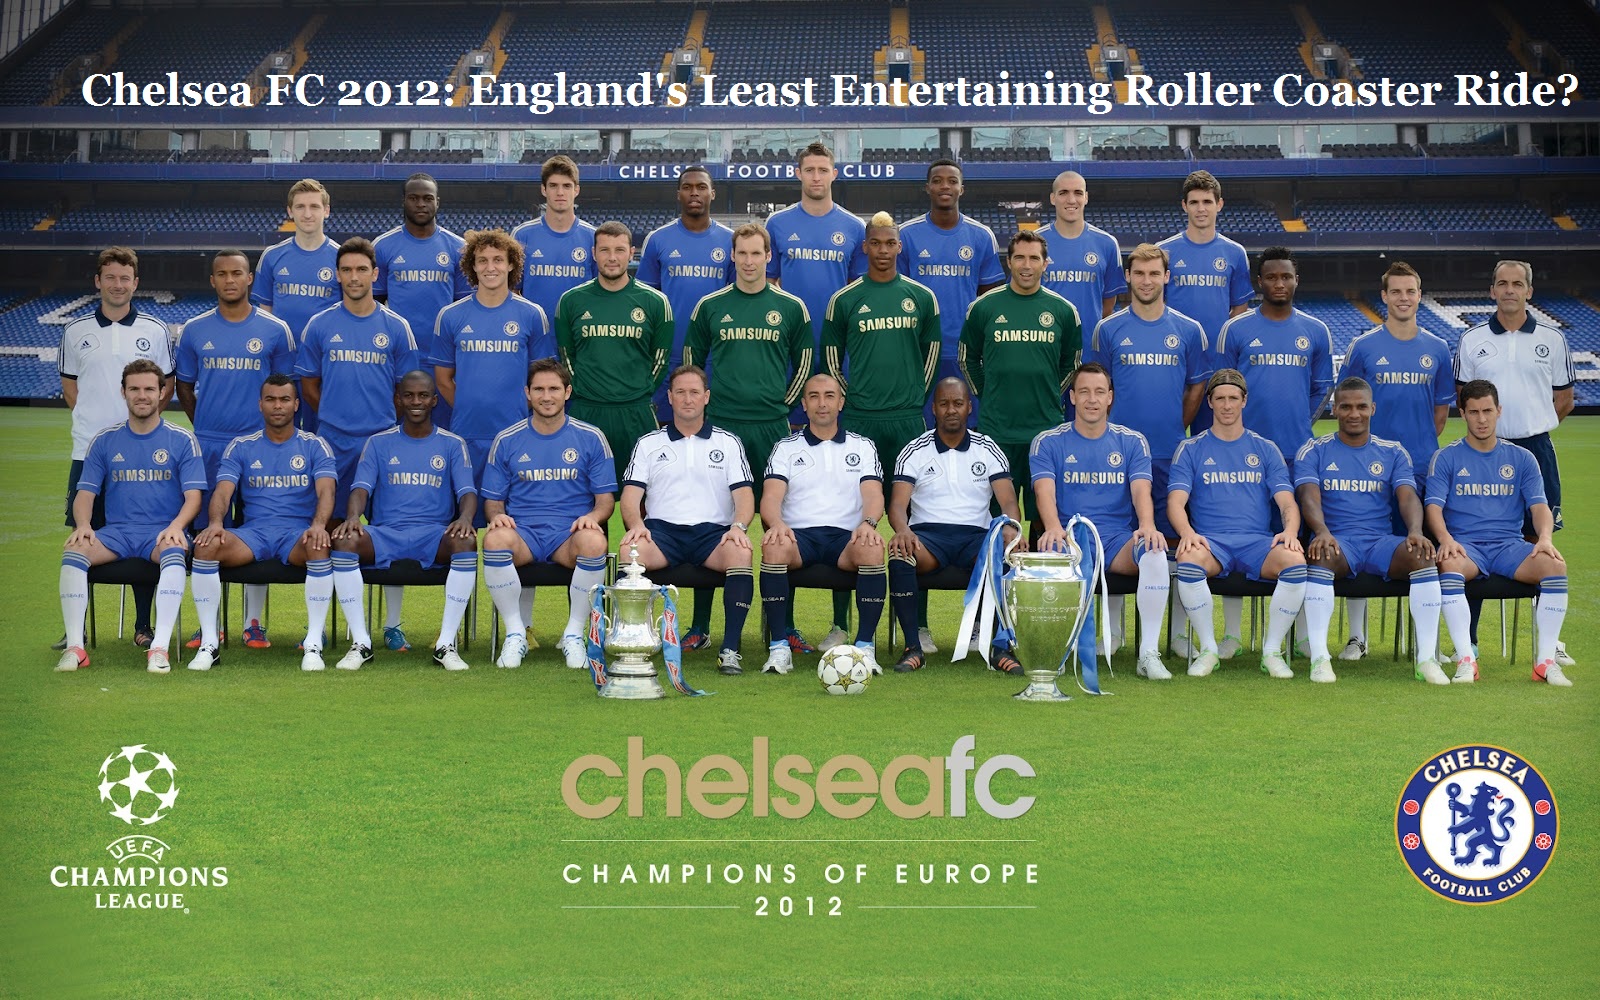 Download this Chelsea England Least Entertaining Roller Coaster Ride picture